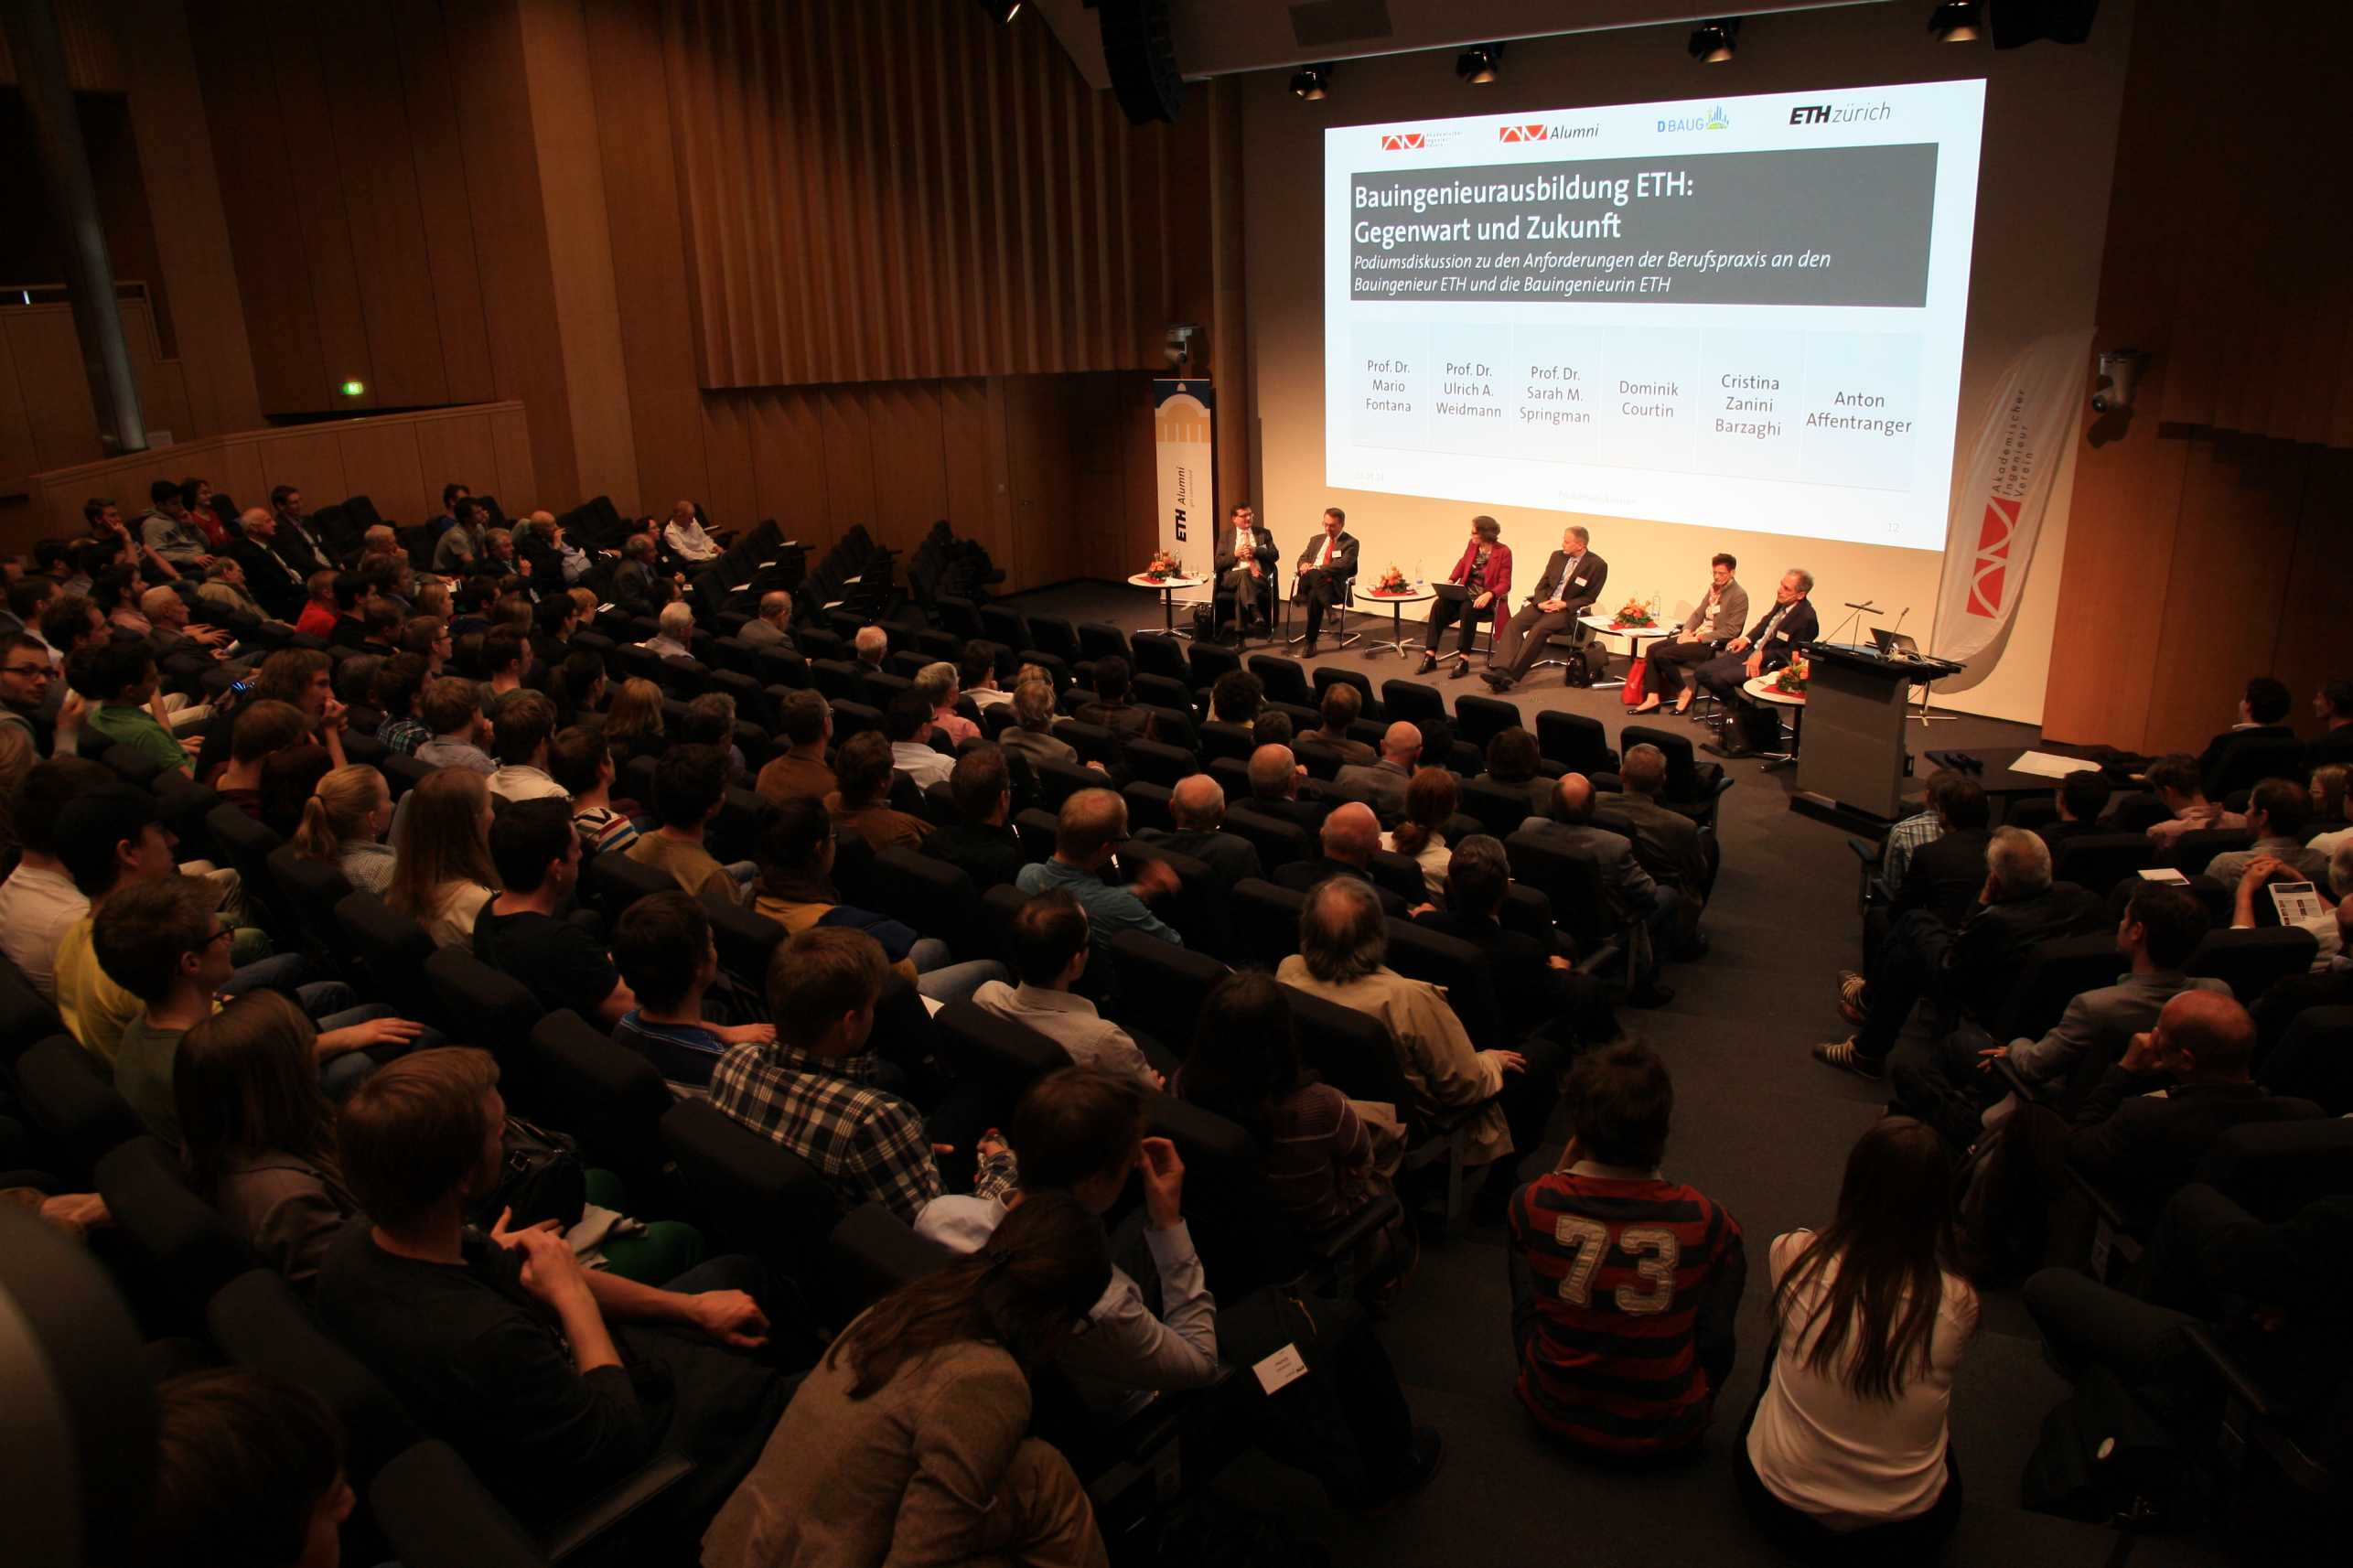 Enlarged view: Panel discussion AIV